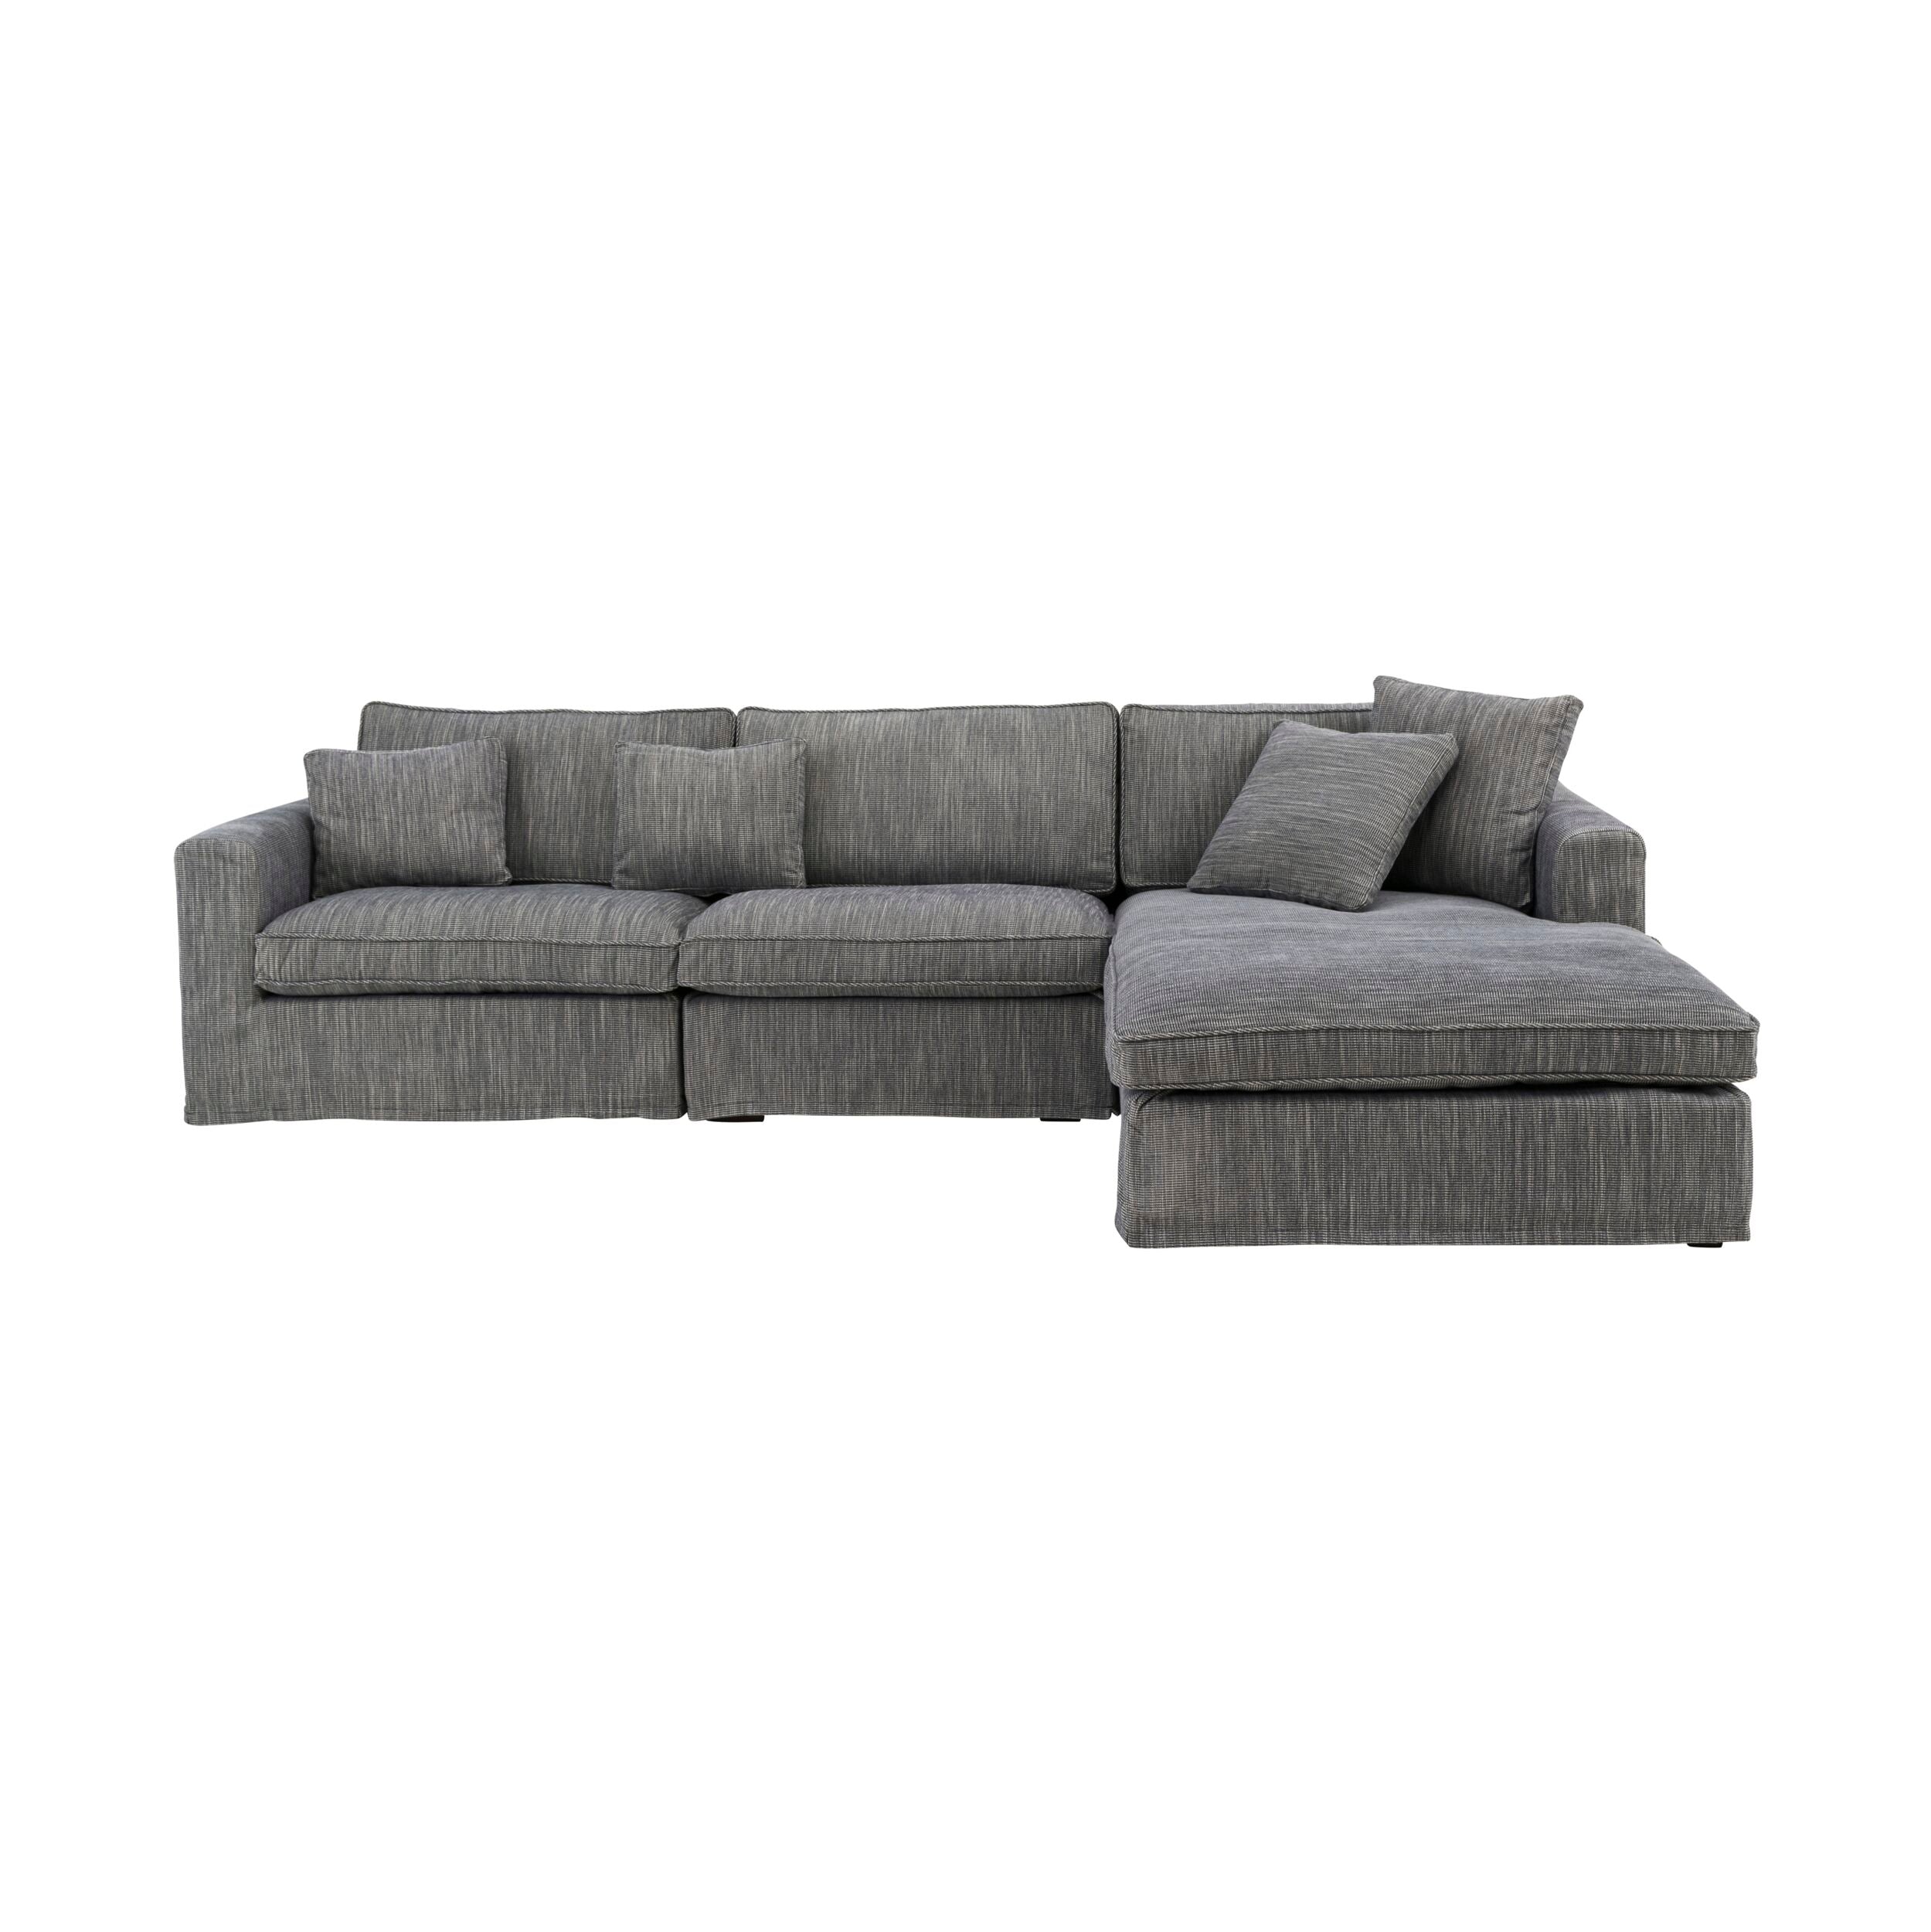 Huxley 3 Seater Linen-Blend Sofa with Right Chaise Charcoal Grey Weave C-001